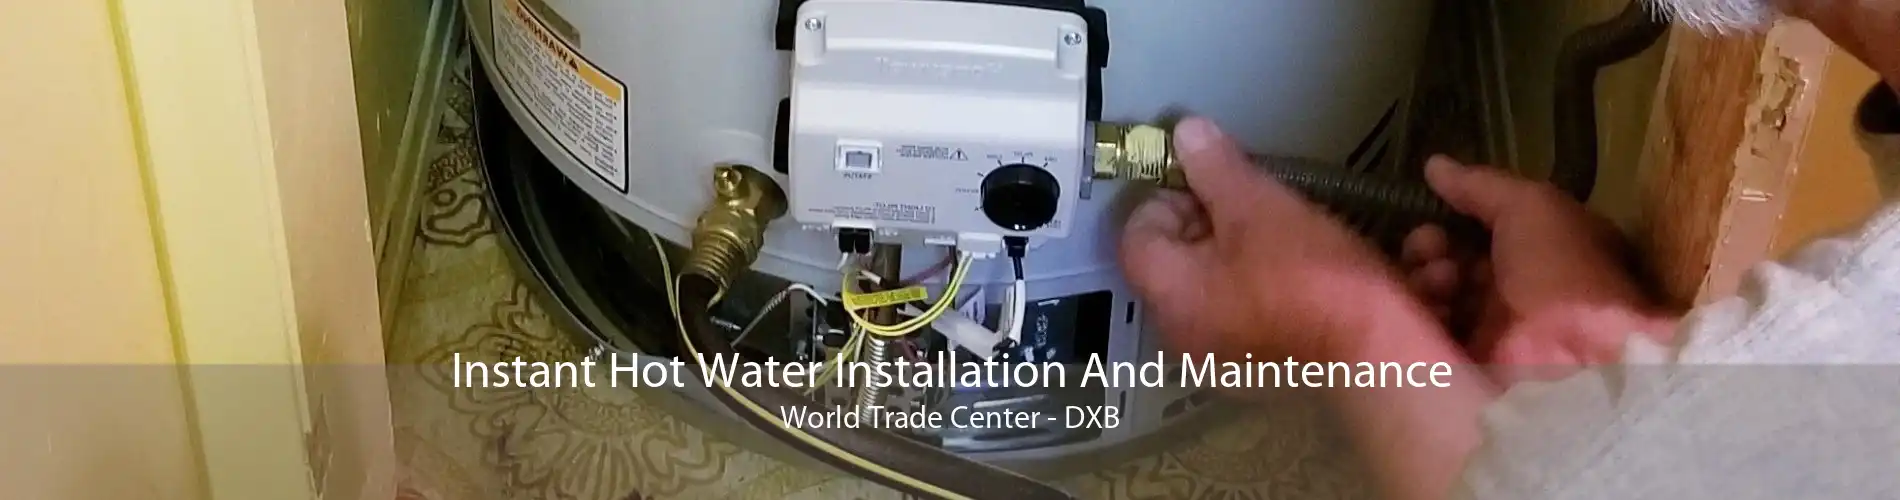 Instant Hot Water Installation And Maintenance World Trade Center - DXB